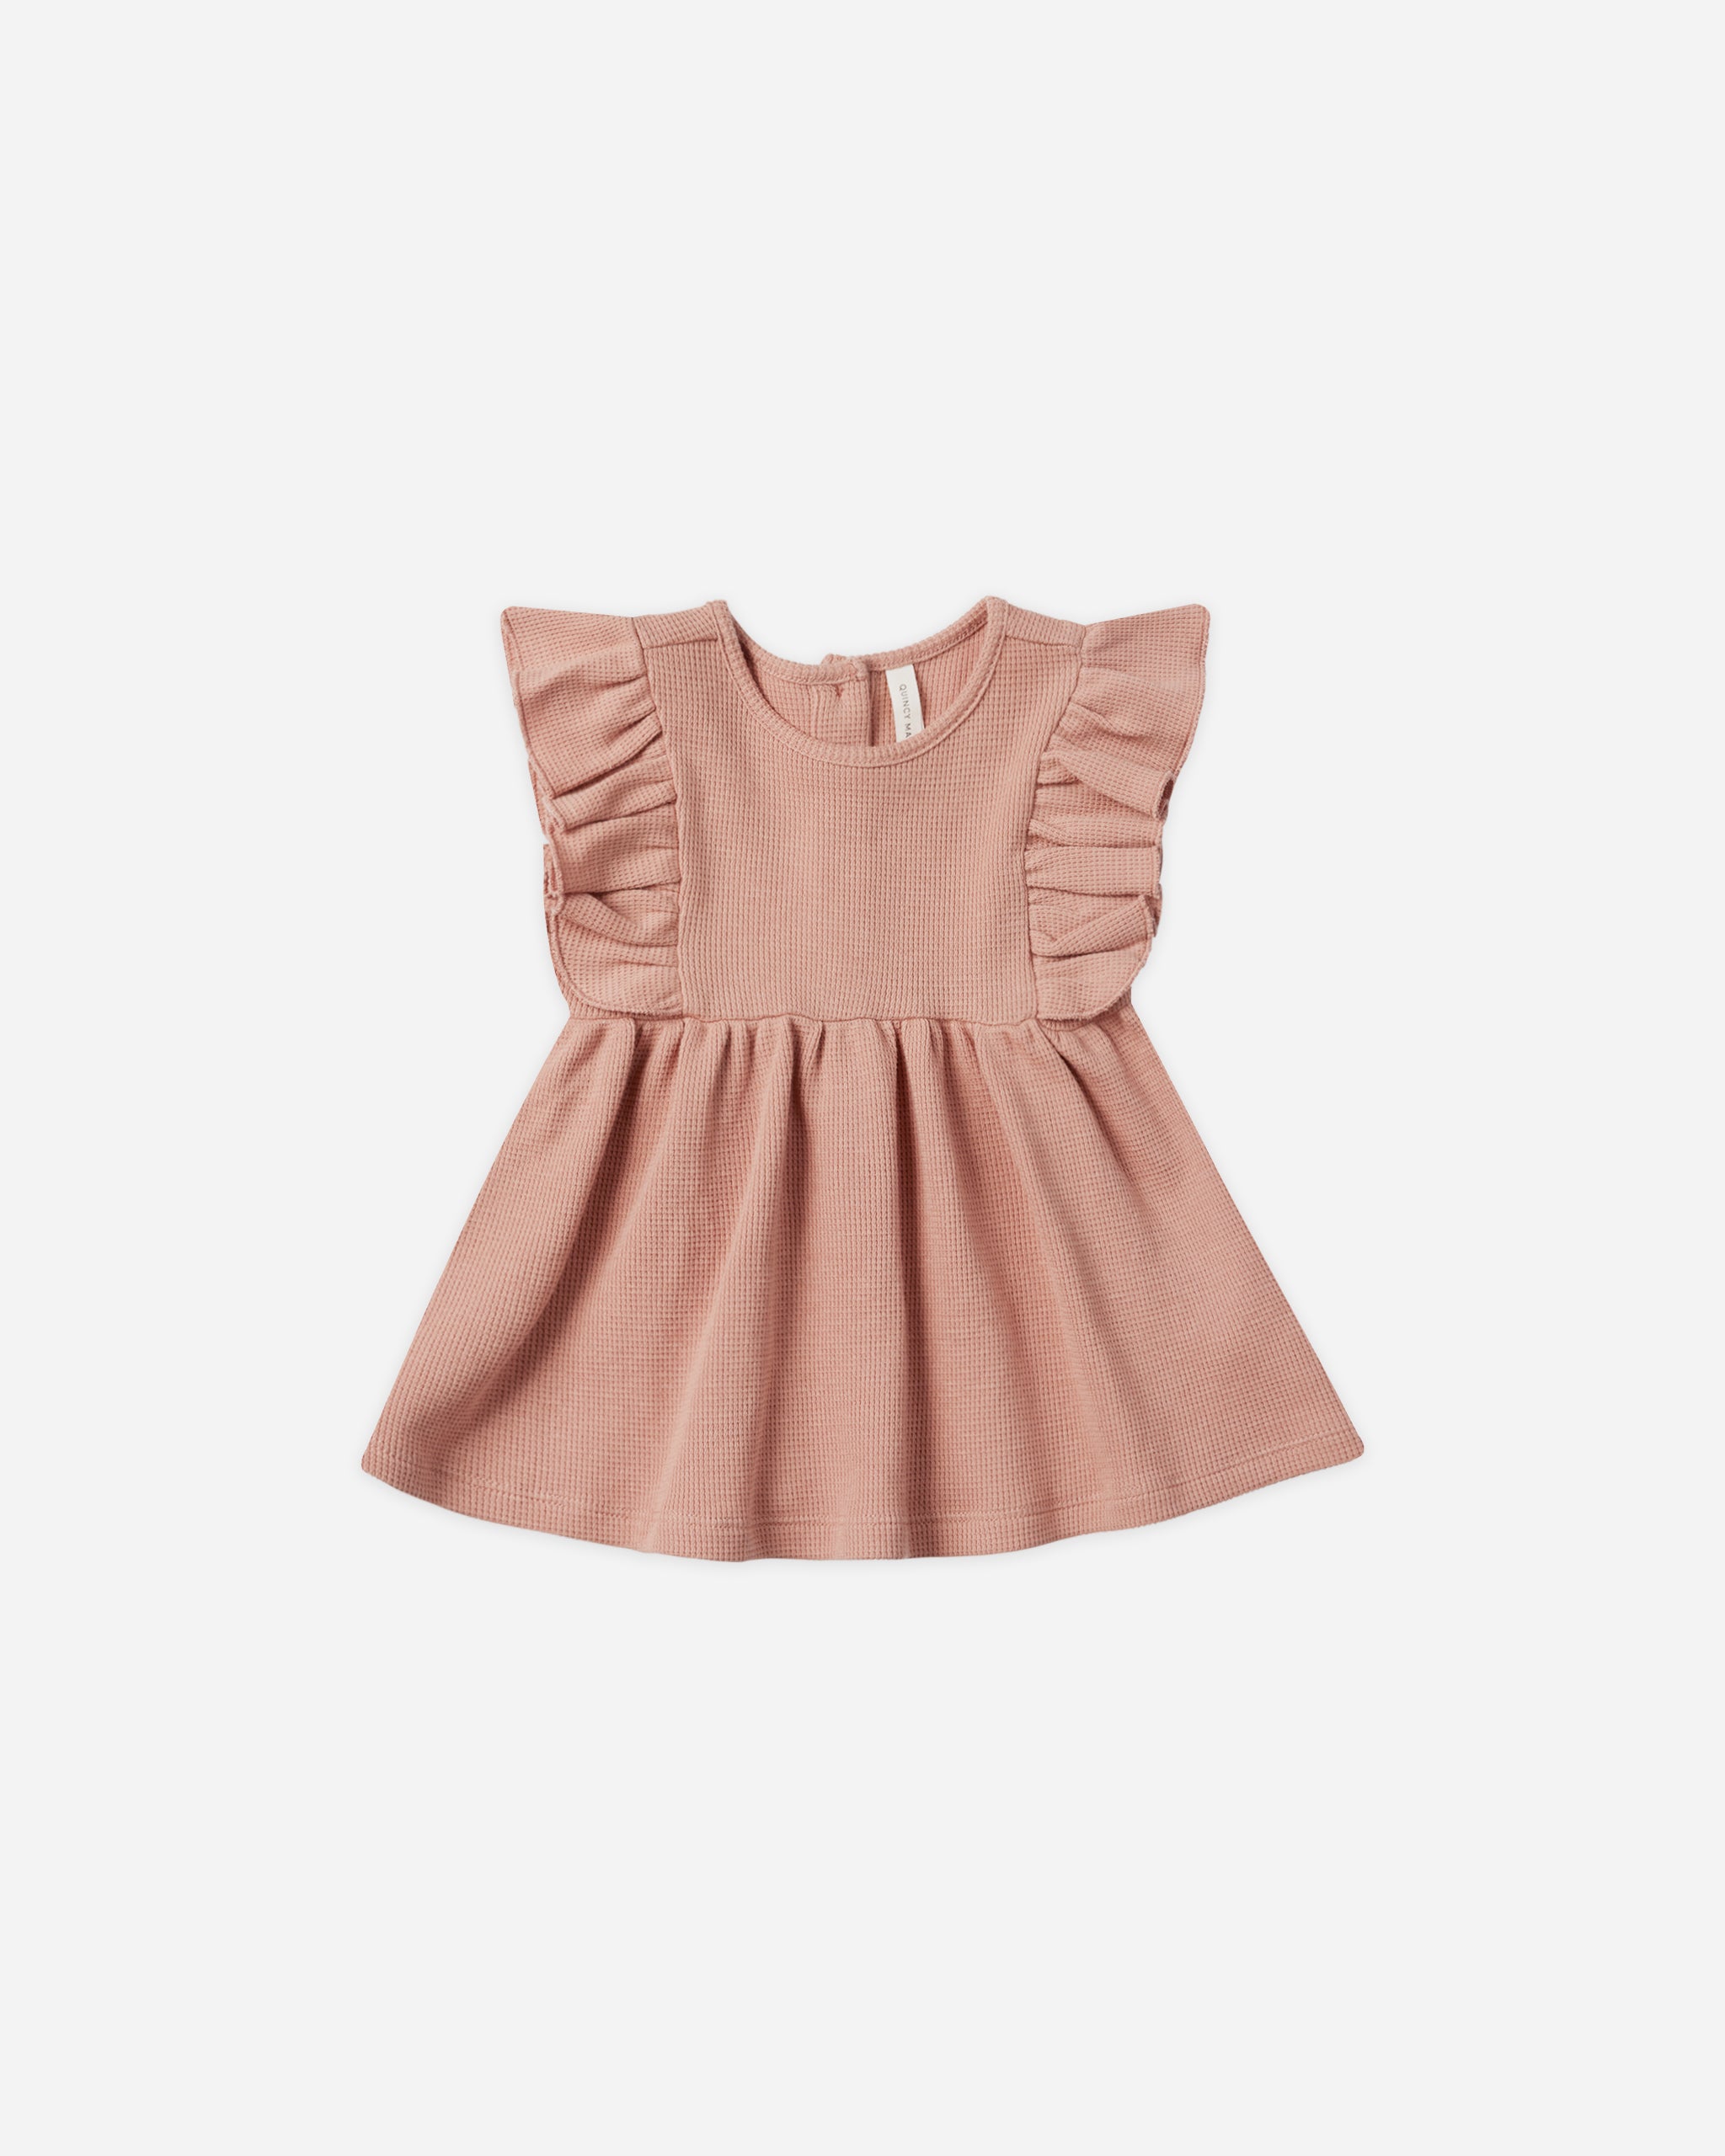 Daisy Dress || Rose - Rylee + Cru | Kids Clothes | Trendy Baby Clothes | Modern Infant Outfits |